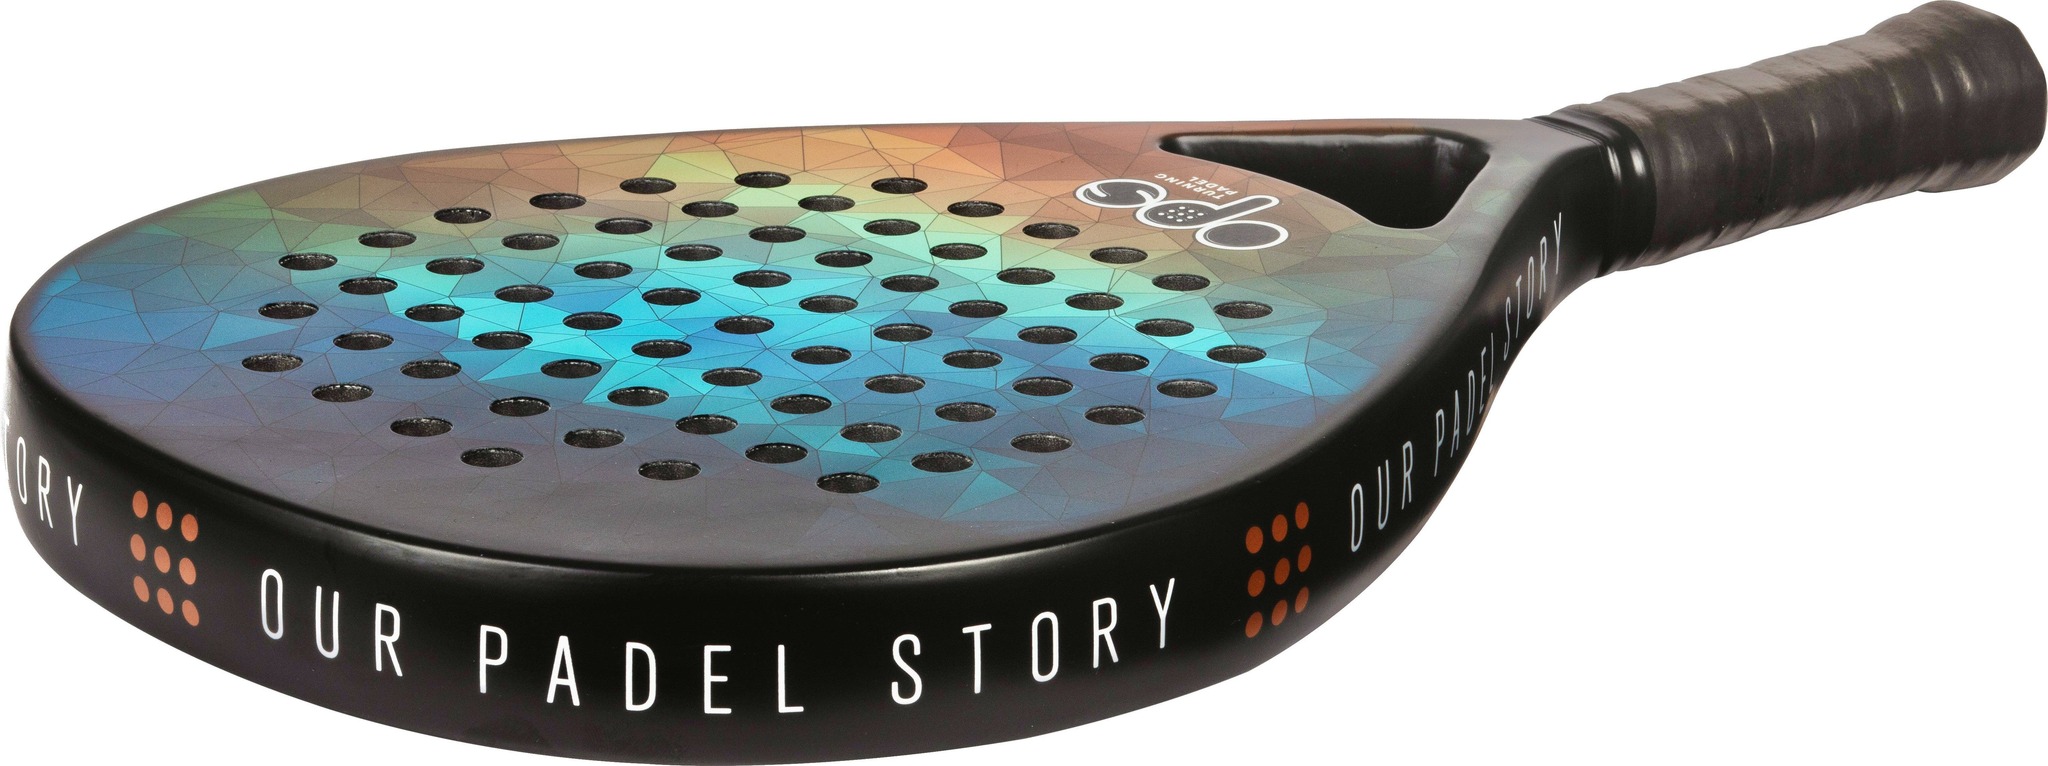 Our Padel Story - Chapter Two